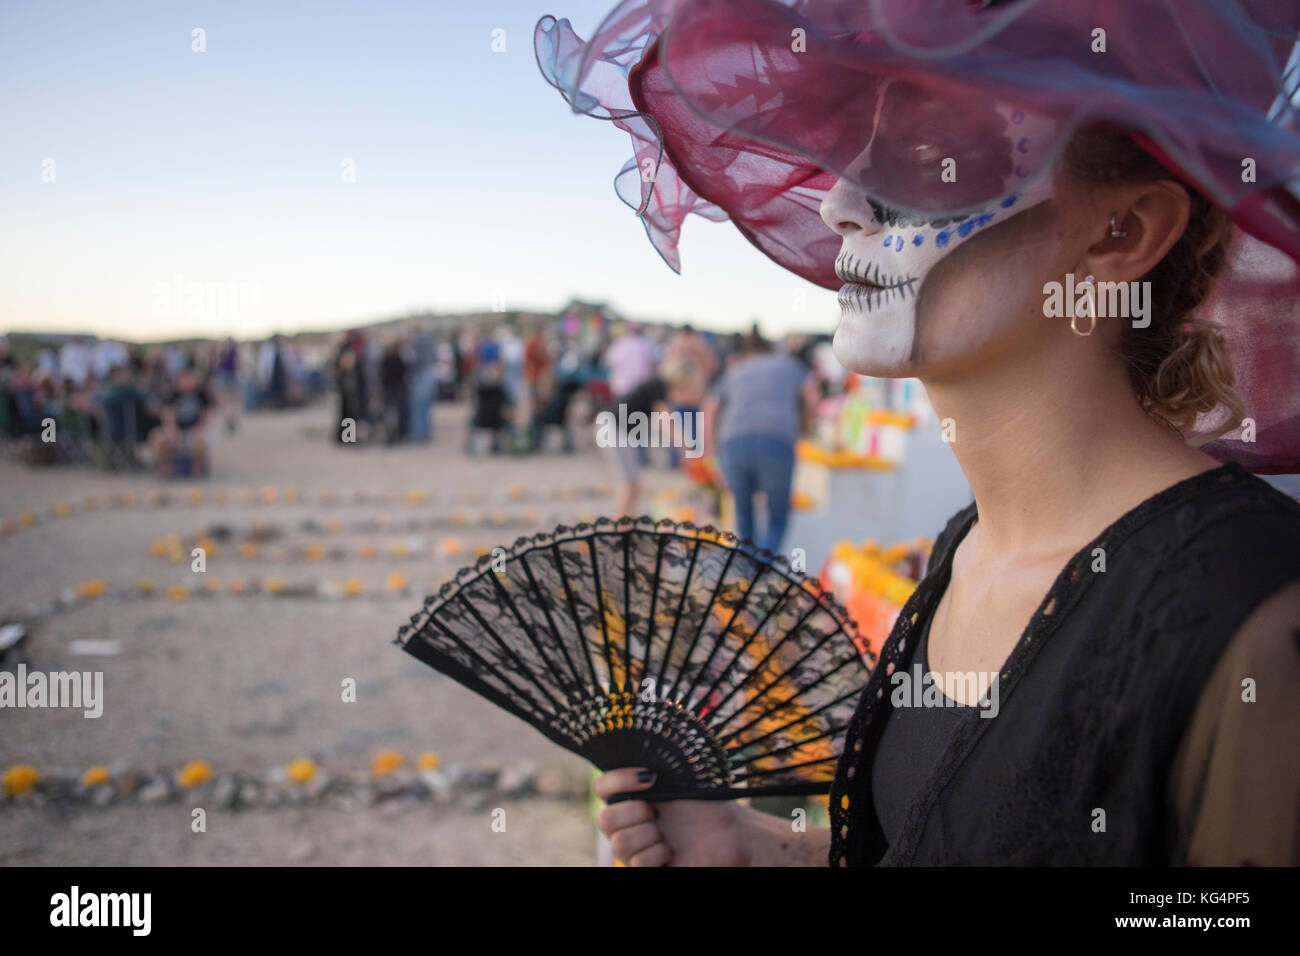 Celebration of Dia de los Muertos, The Day of the Dead, in Terlingua, a former ghost town istuated on the border with Mexico in far West Texas. Stock Photo